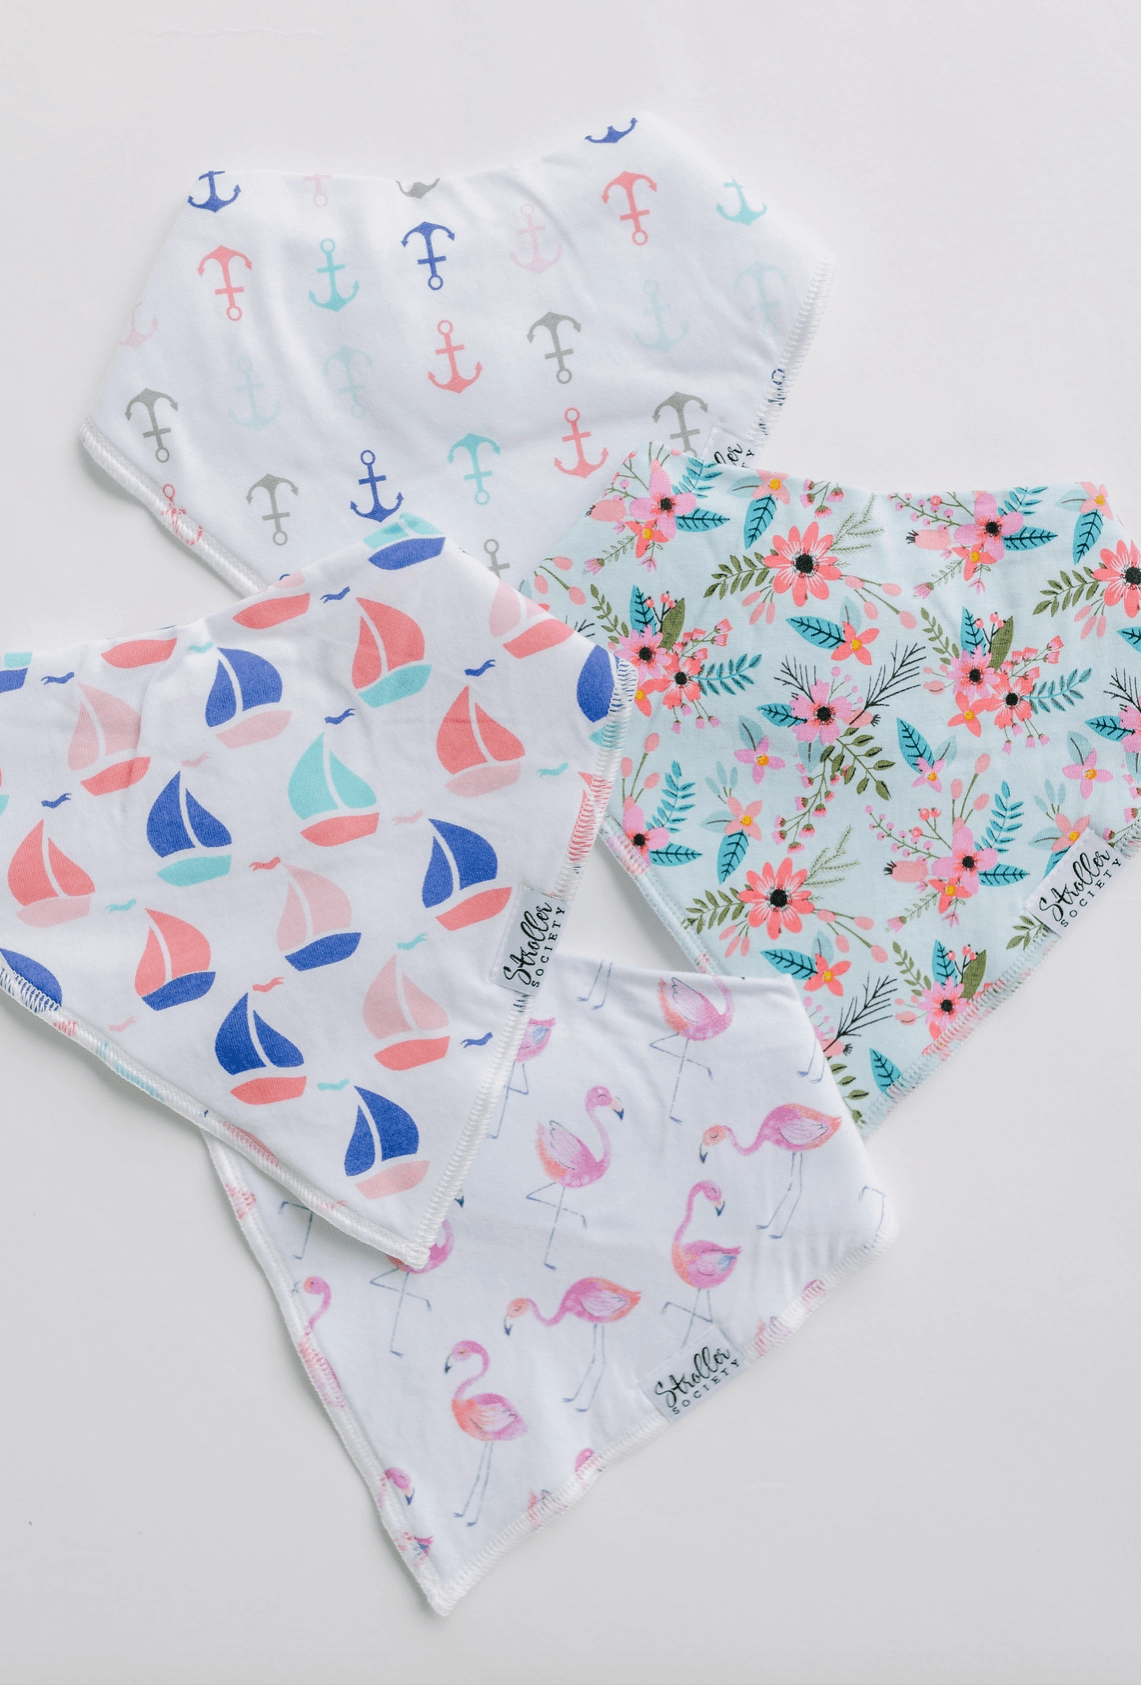 Baby Bandana Bibs - Anchors, Flowers, Flamingos, Boats baby essentials Maple & Co. Boutique   